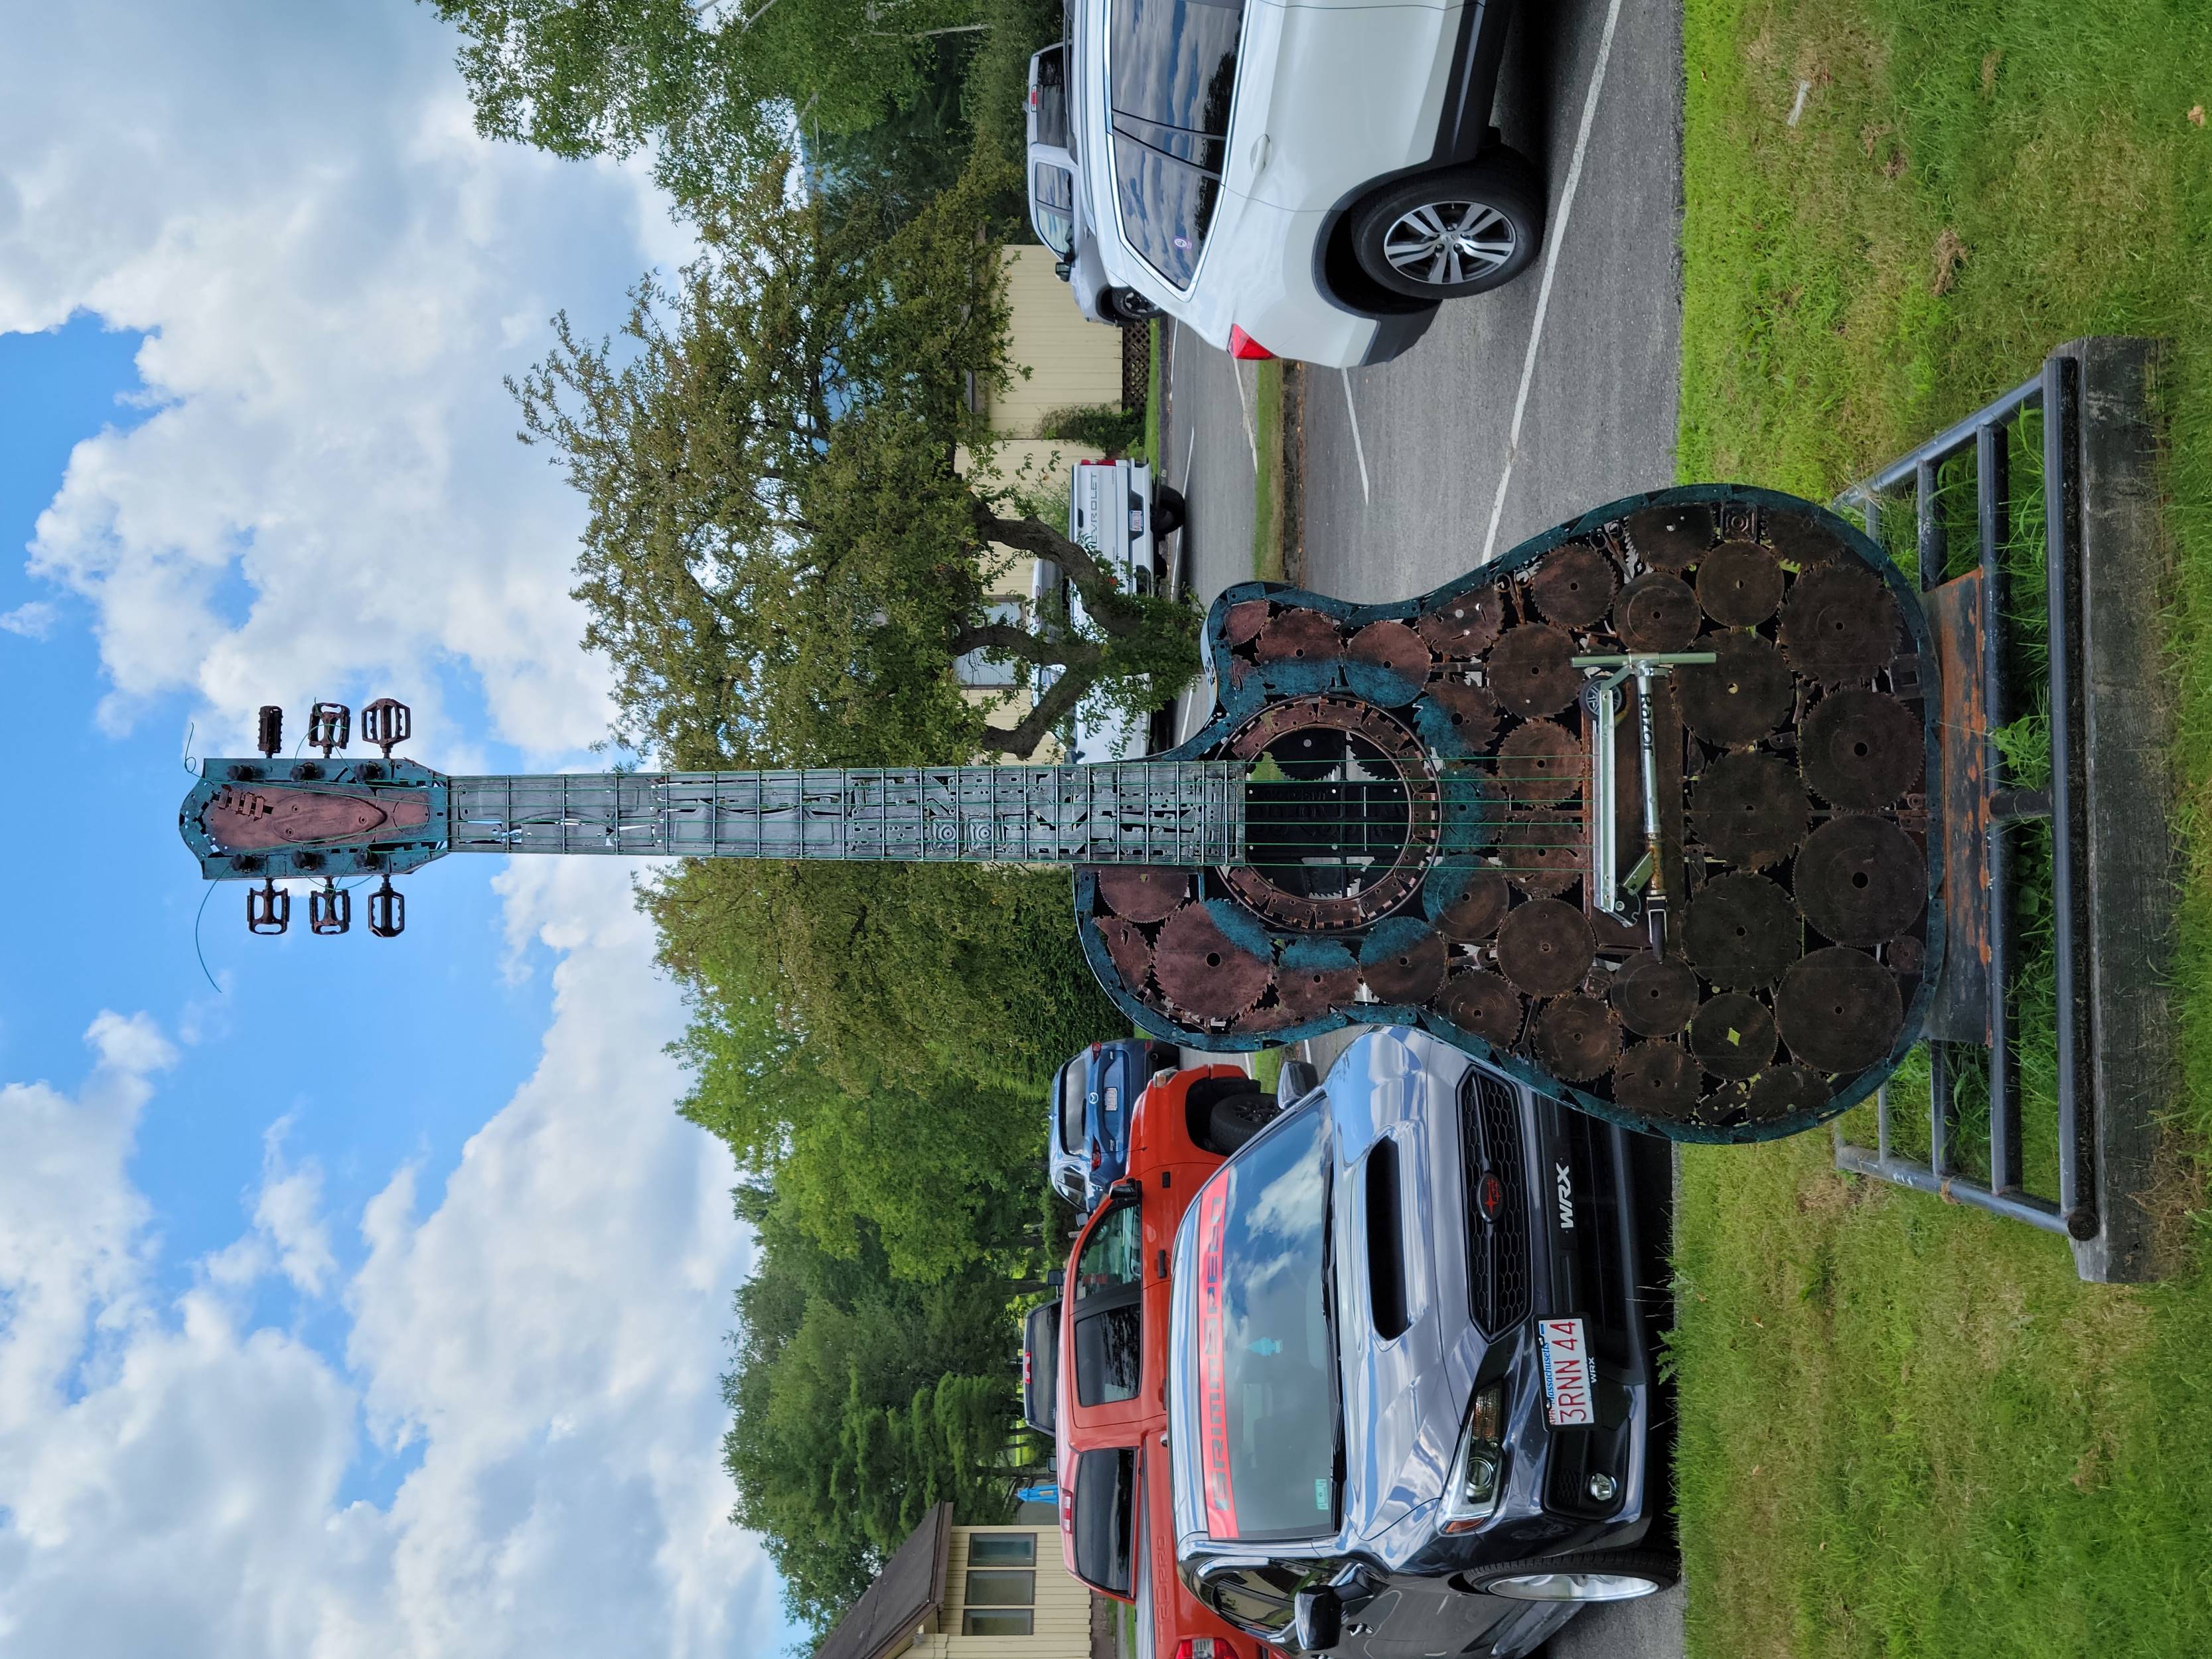 A statue of a guitar made of different metallic materials sits in front of a parking lot full of cars